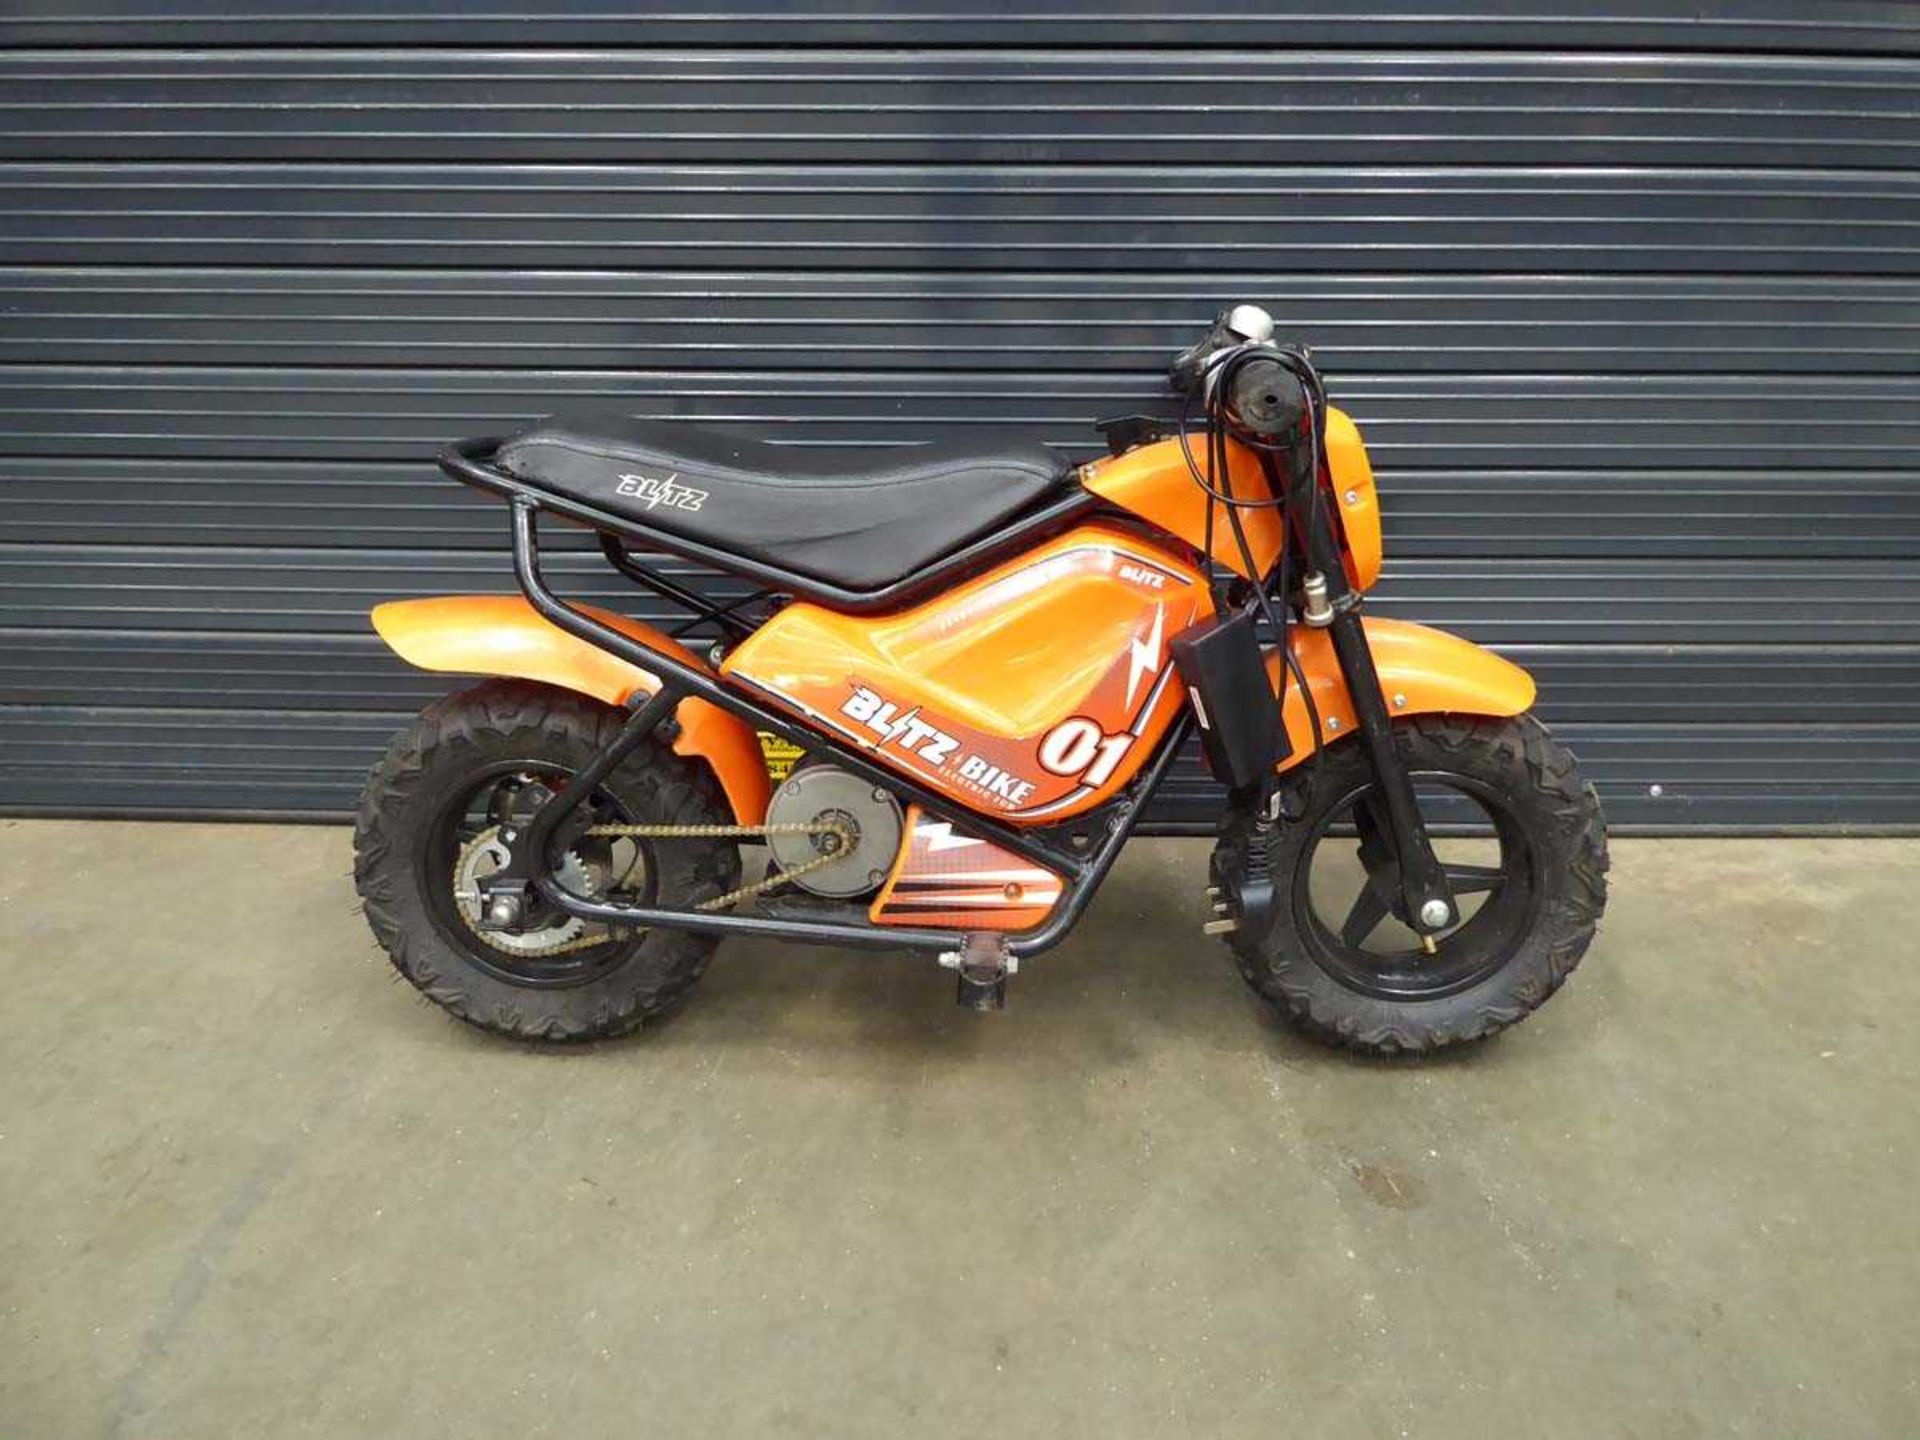 Small Blitz orange electric child's motorbike with charger